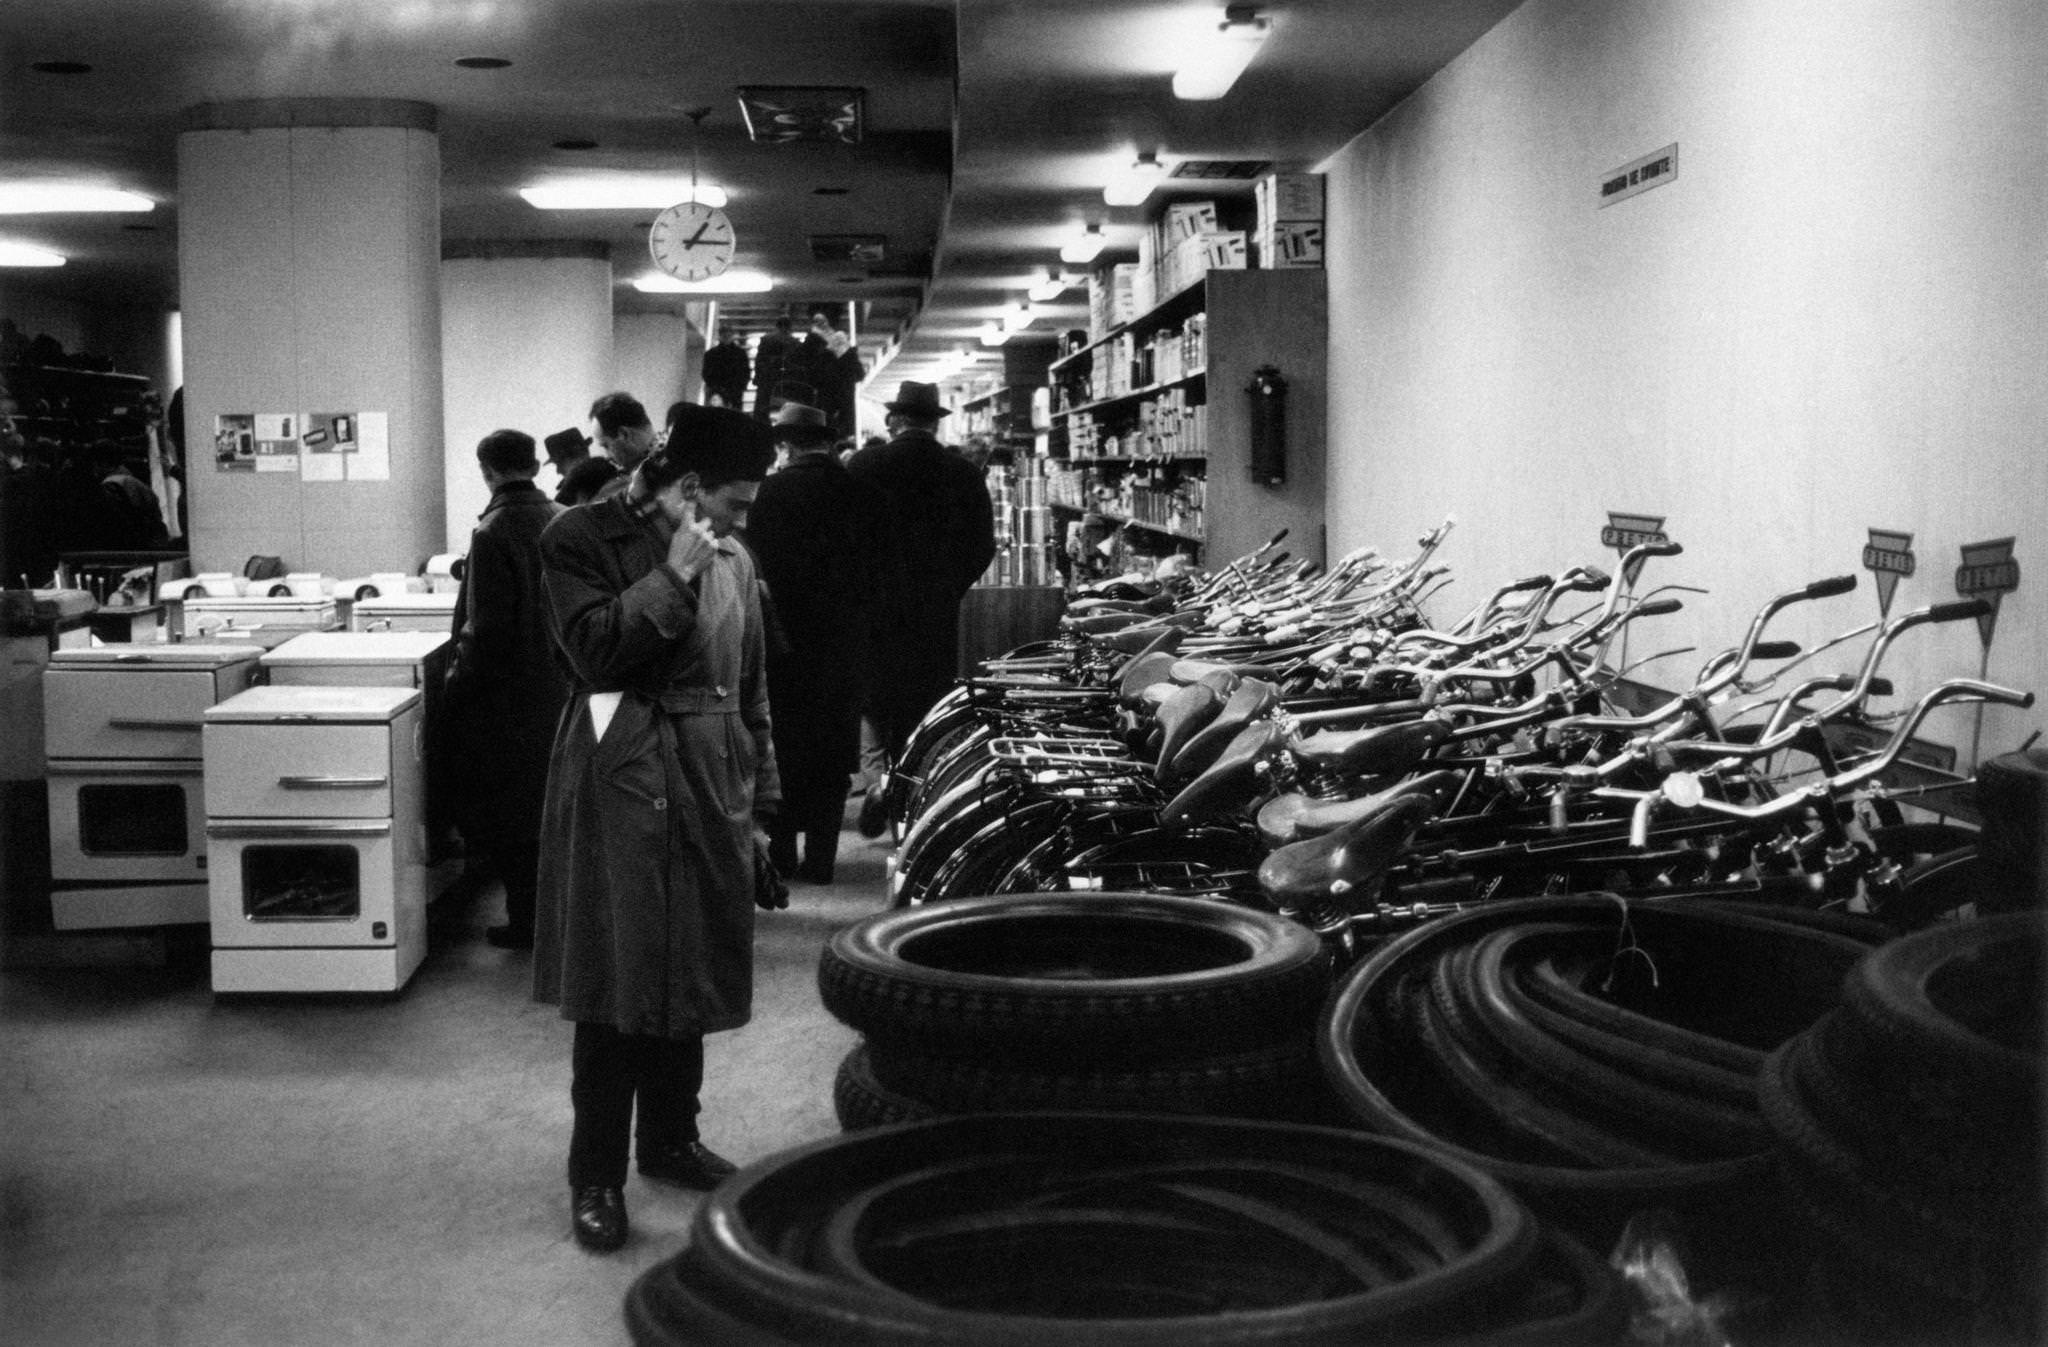 People watching goods displayed at the department store in Belgrade, 1965